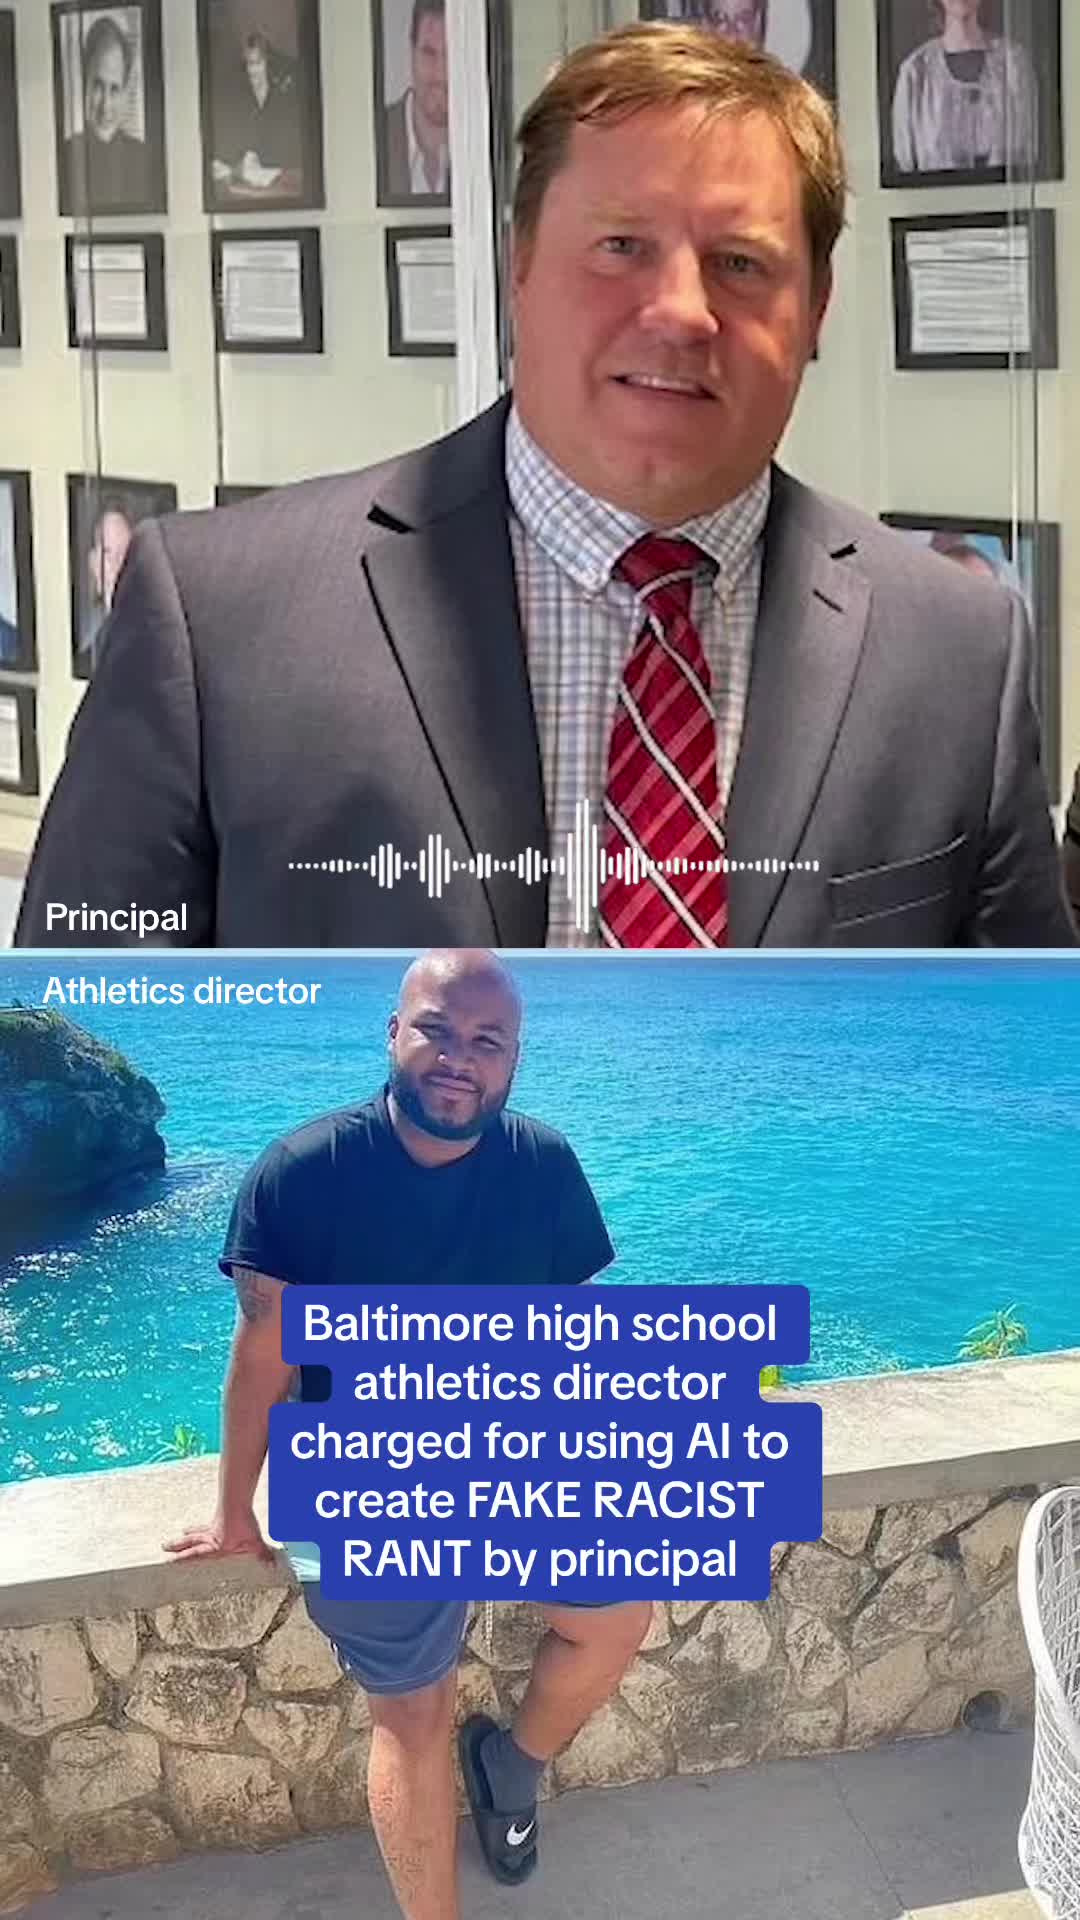 This racist rant is NOT REAL. Baltimore high school athletics director Dazhon Darien fabricated the recording using AI to make it look like the school’s principal, Eric Eiswert spewed racist rhetoric. Now Darien is facing charges.  #ai #artificialintelligence #racist #crime #news